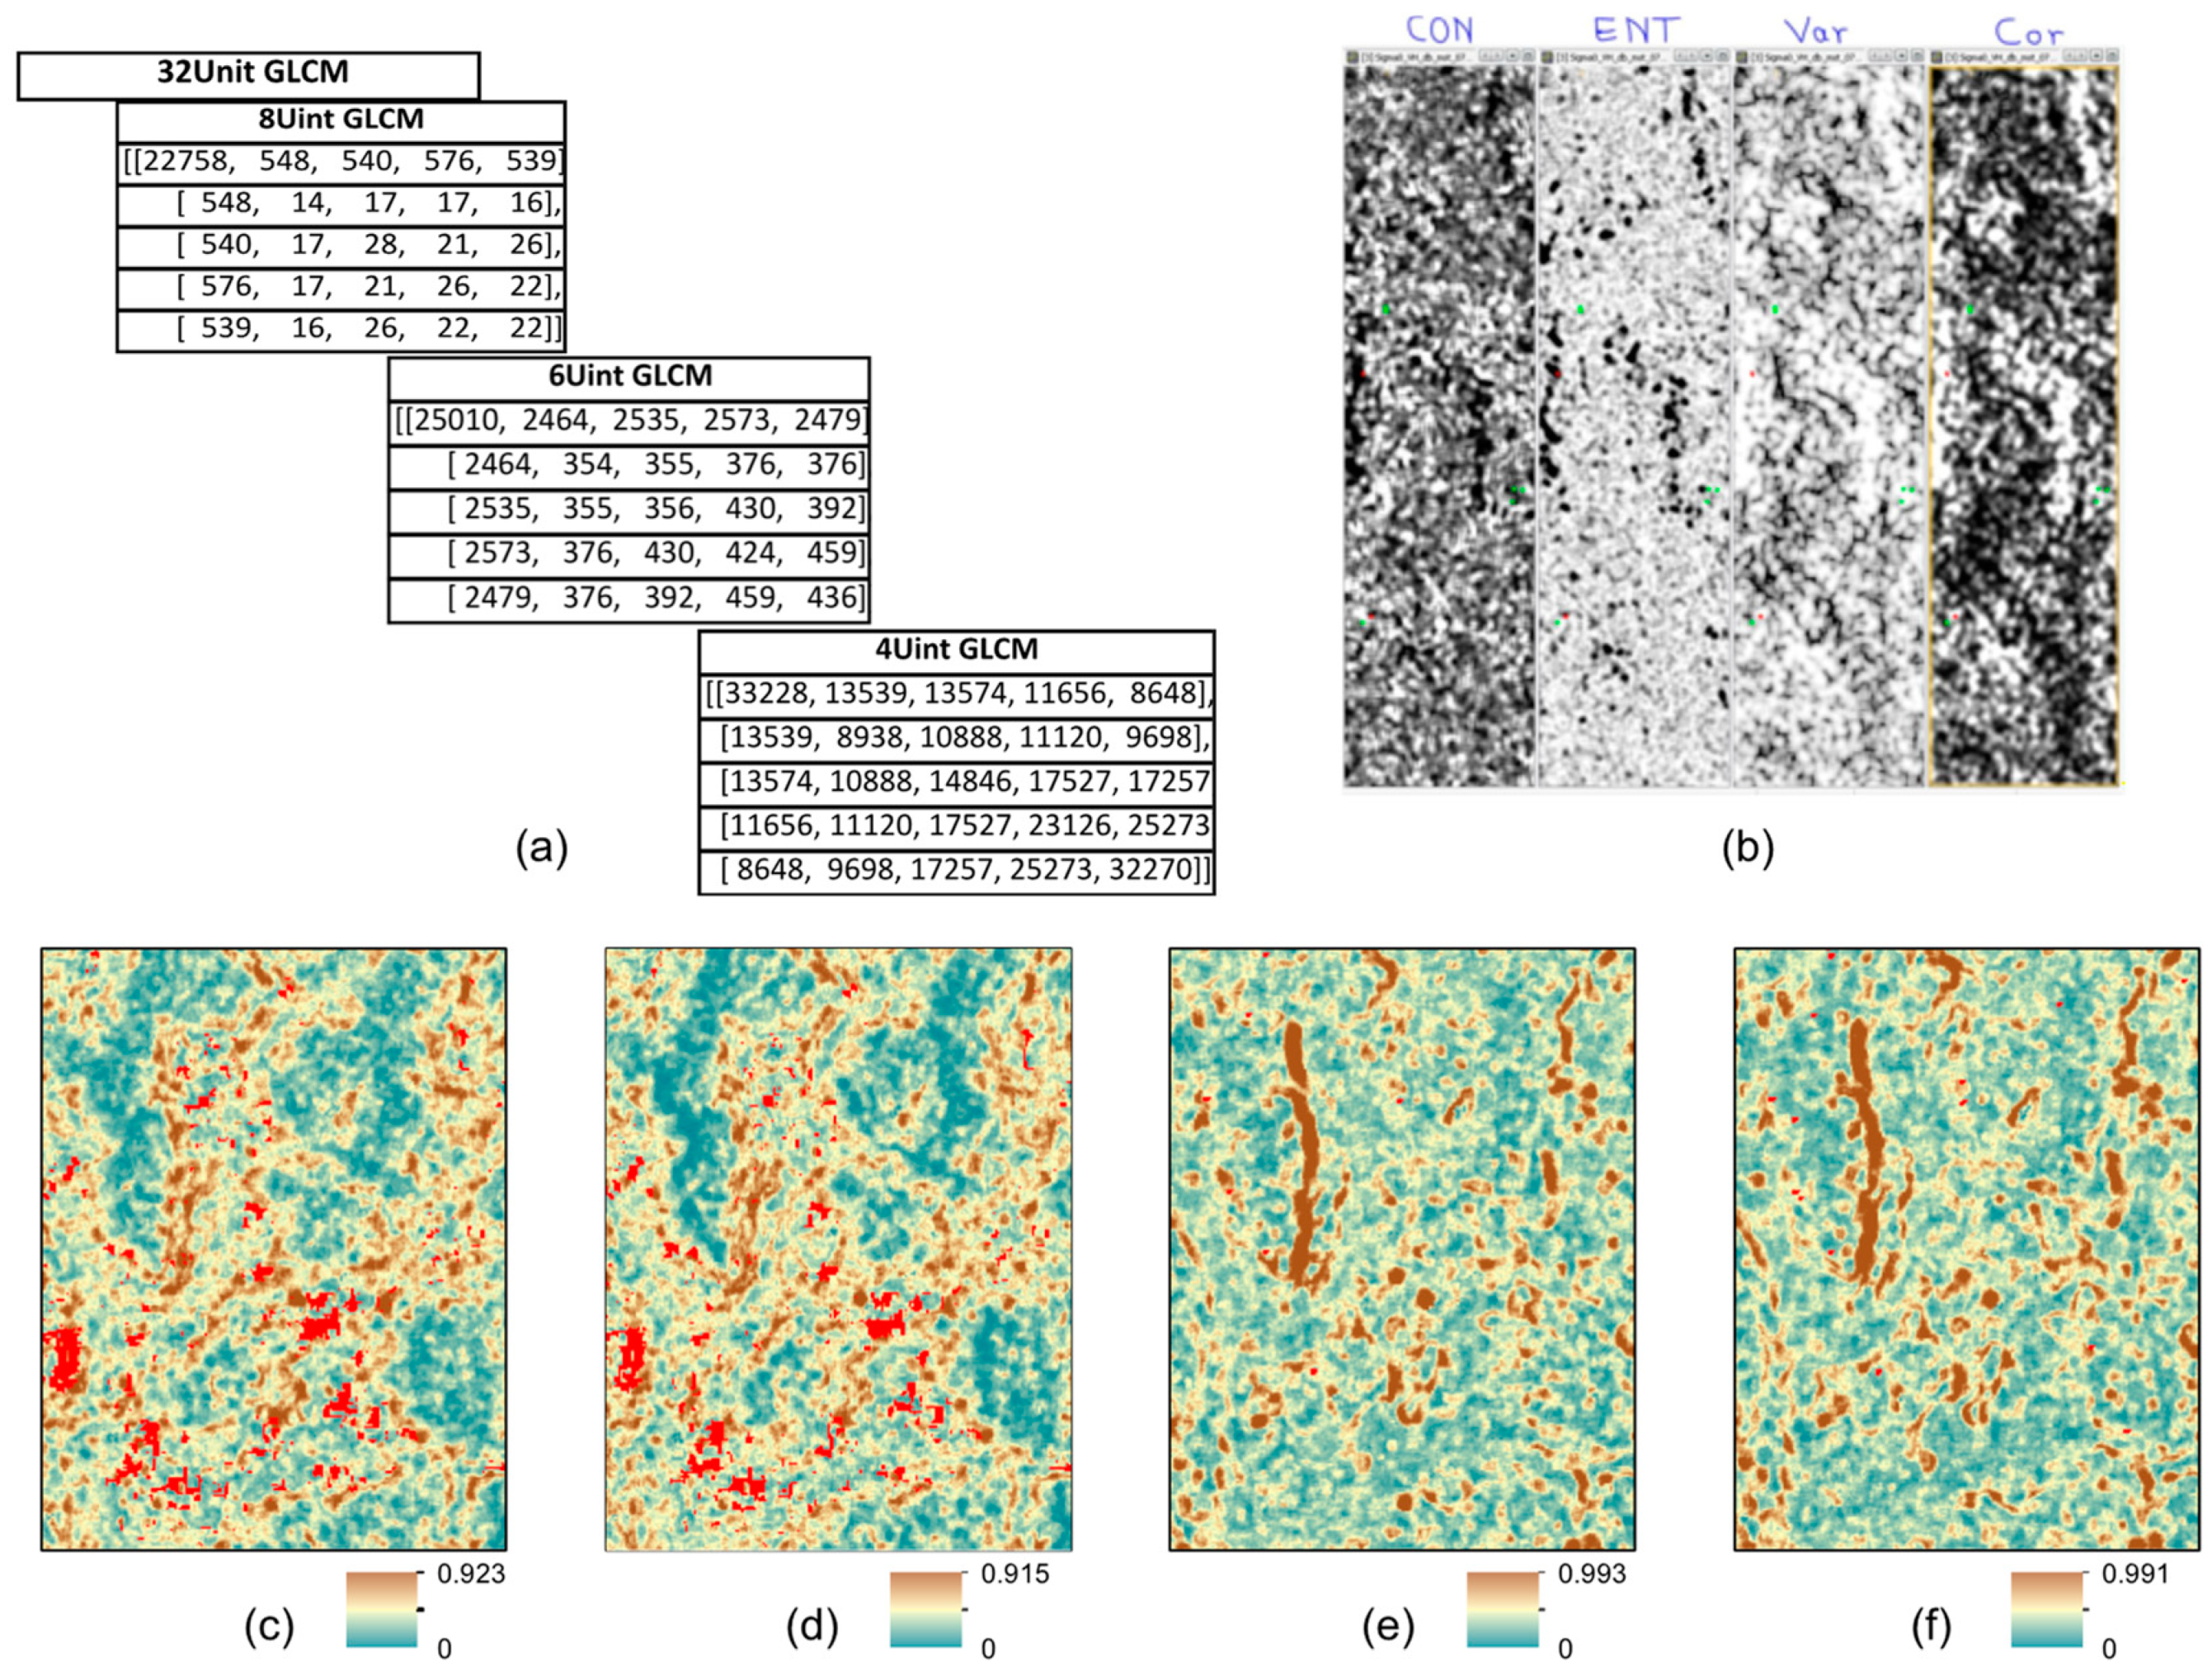 IJGI | Free Full-Text | Delineation of Cocoa Agroforests Using Multiseason  Sentinel-1 SAR Images: A Low Grey Level Range Reduces Uncertainties in GLCM  Texture-Based Mapping | HTML